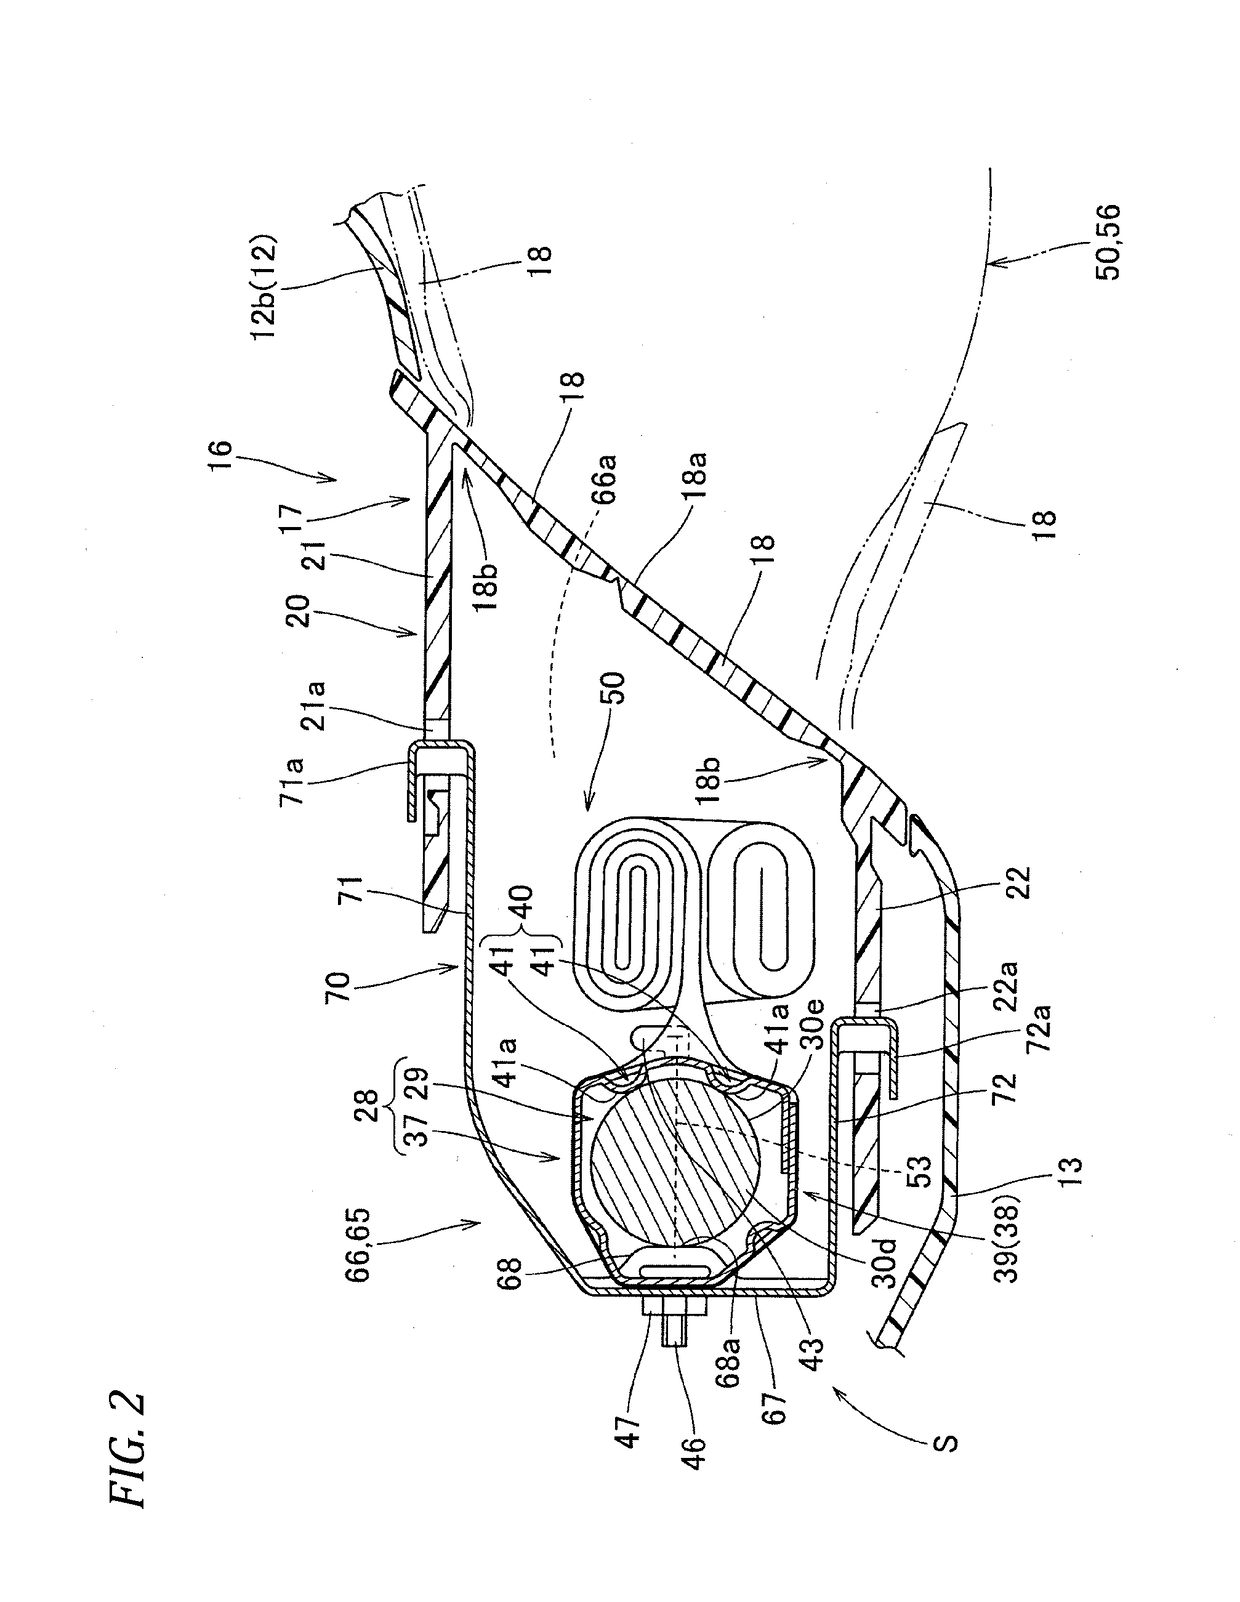 Knee-protection airbag device